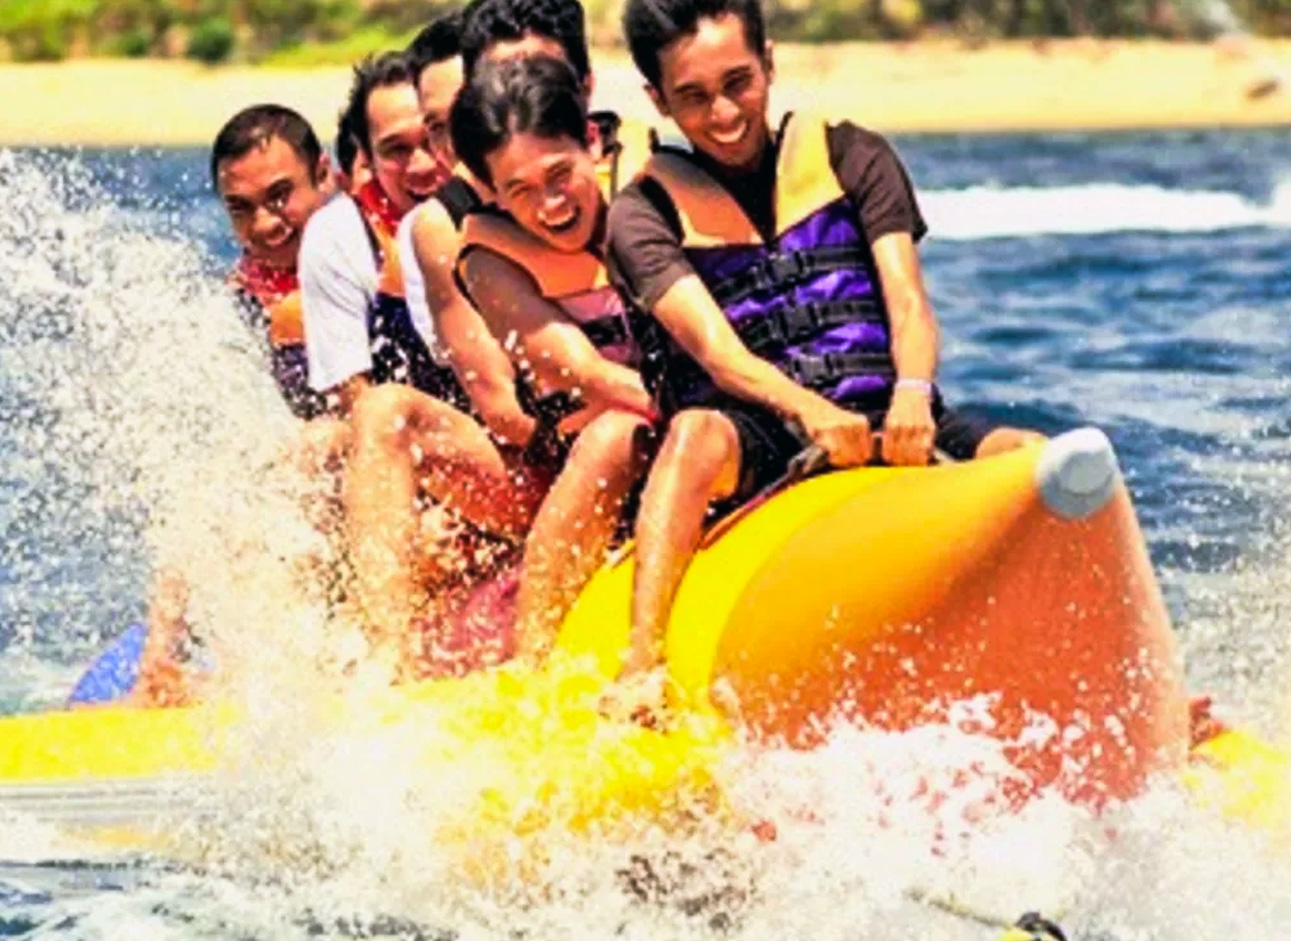 Banana Boat Ride - Enjoy a fun-filled adventure on a banana boat in the water